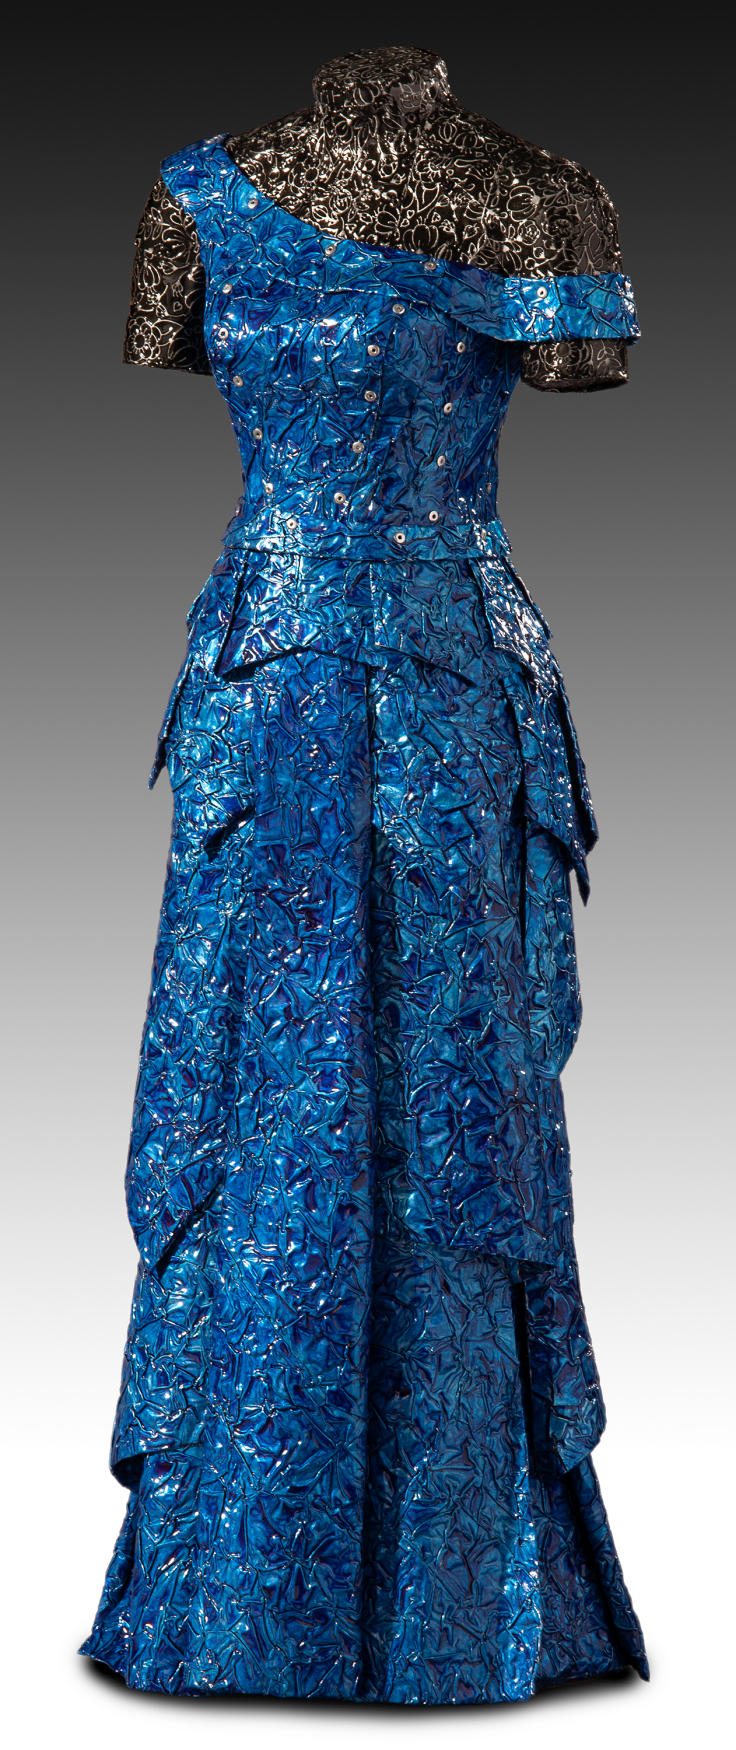 "Blue Gown"
29" Tall